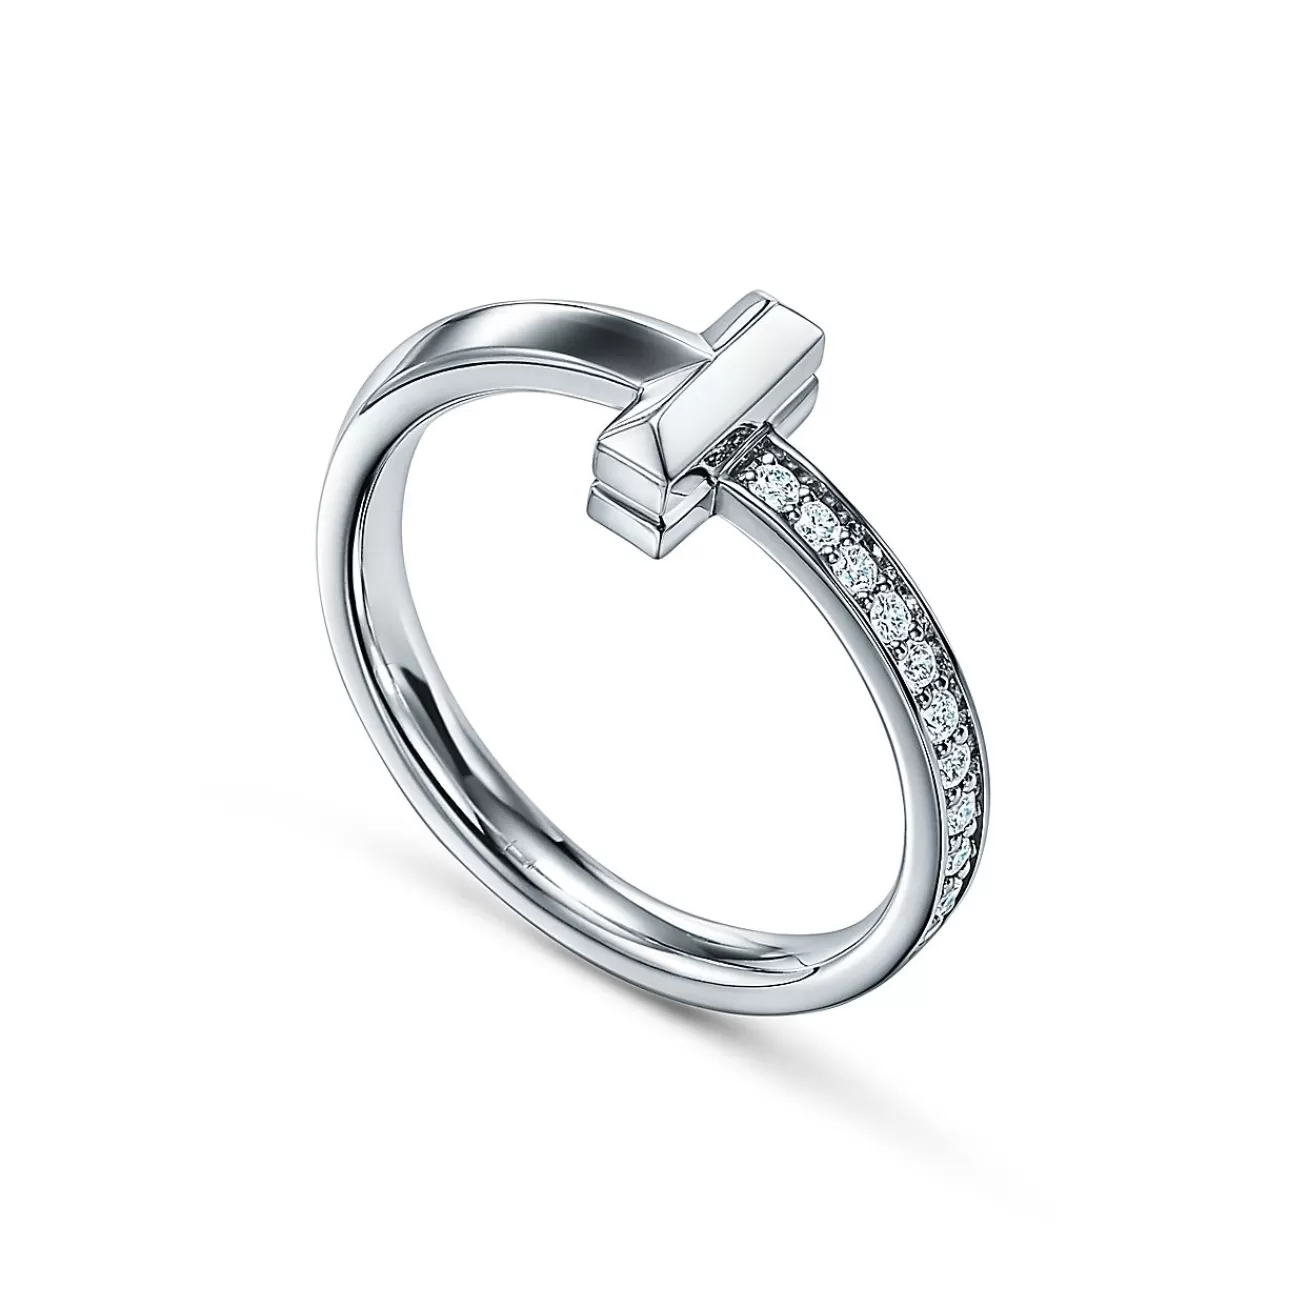 Tiffany & Co. Tiffany T T1 Ring in White Gold with Diamonds, 2.5 mm Wide | ^ Rings | Men's Jewelry